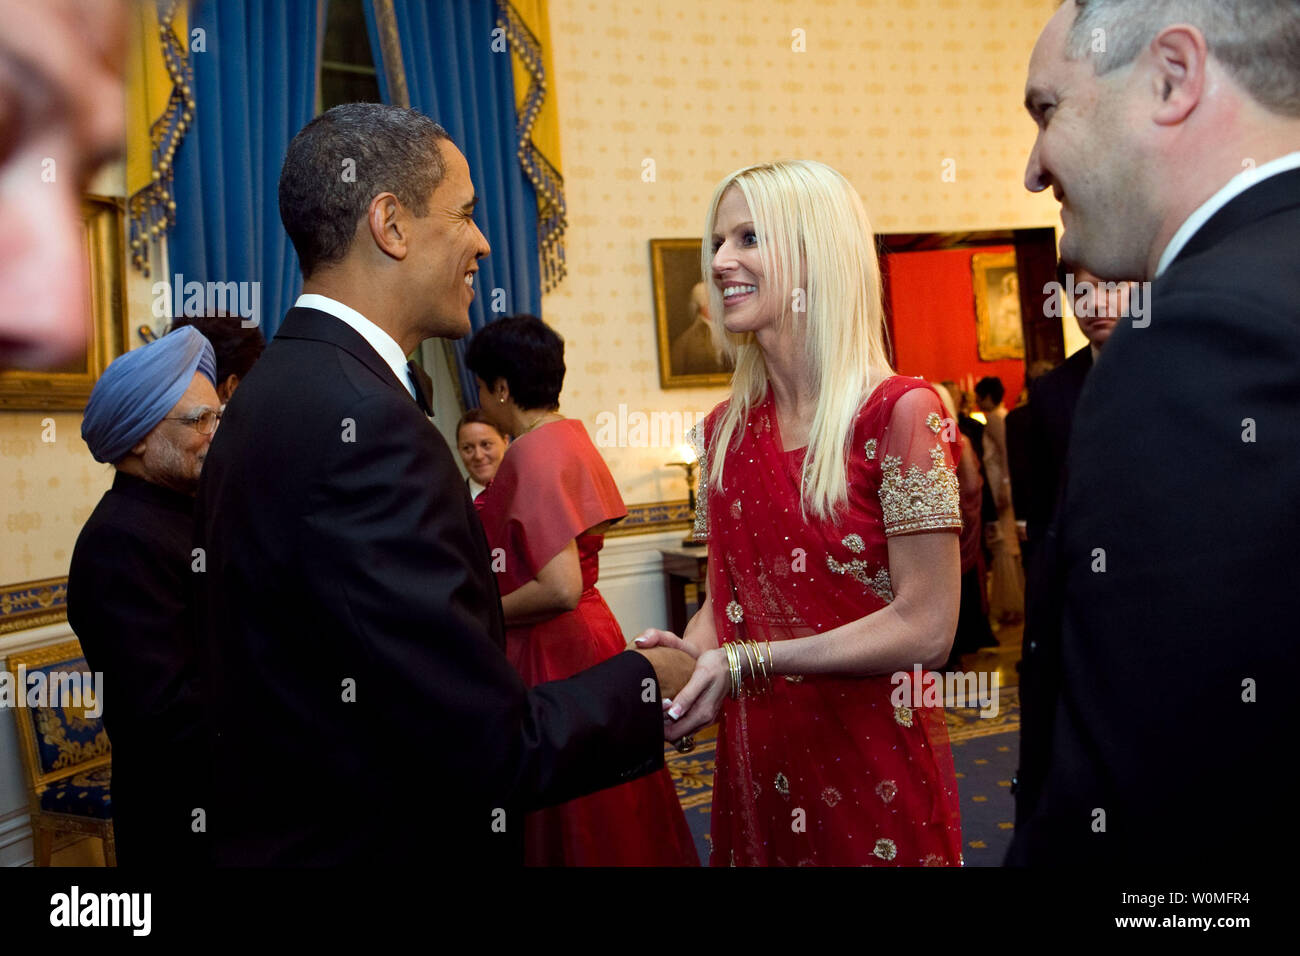 In this photo released by the White House on November 27, 2009, President Barack Obama greets Michaele and Tareq Salahi during a receiving line prior to a State Dinner for Indian Prime Minister Manmohan Singh (back,left) in the Blue Room at the White House in Washington on November 24, 2009. The Secret Service is looking into its own security procedures after the uninvited Virginia couple was able to get into the dinner.   UPI/Samantha Appleton/White House Stock Photo